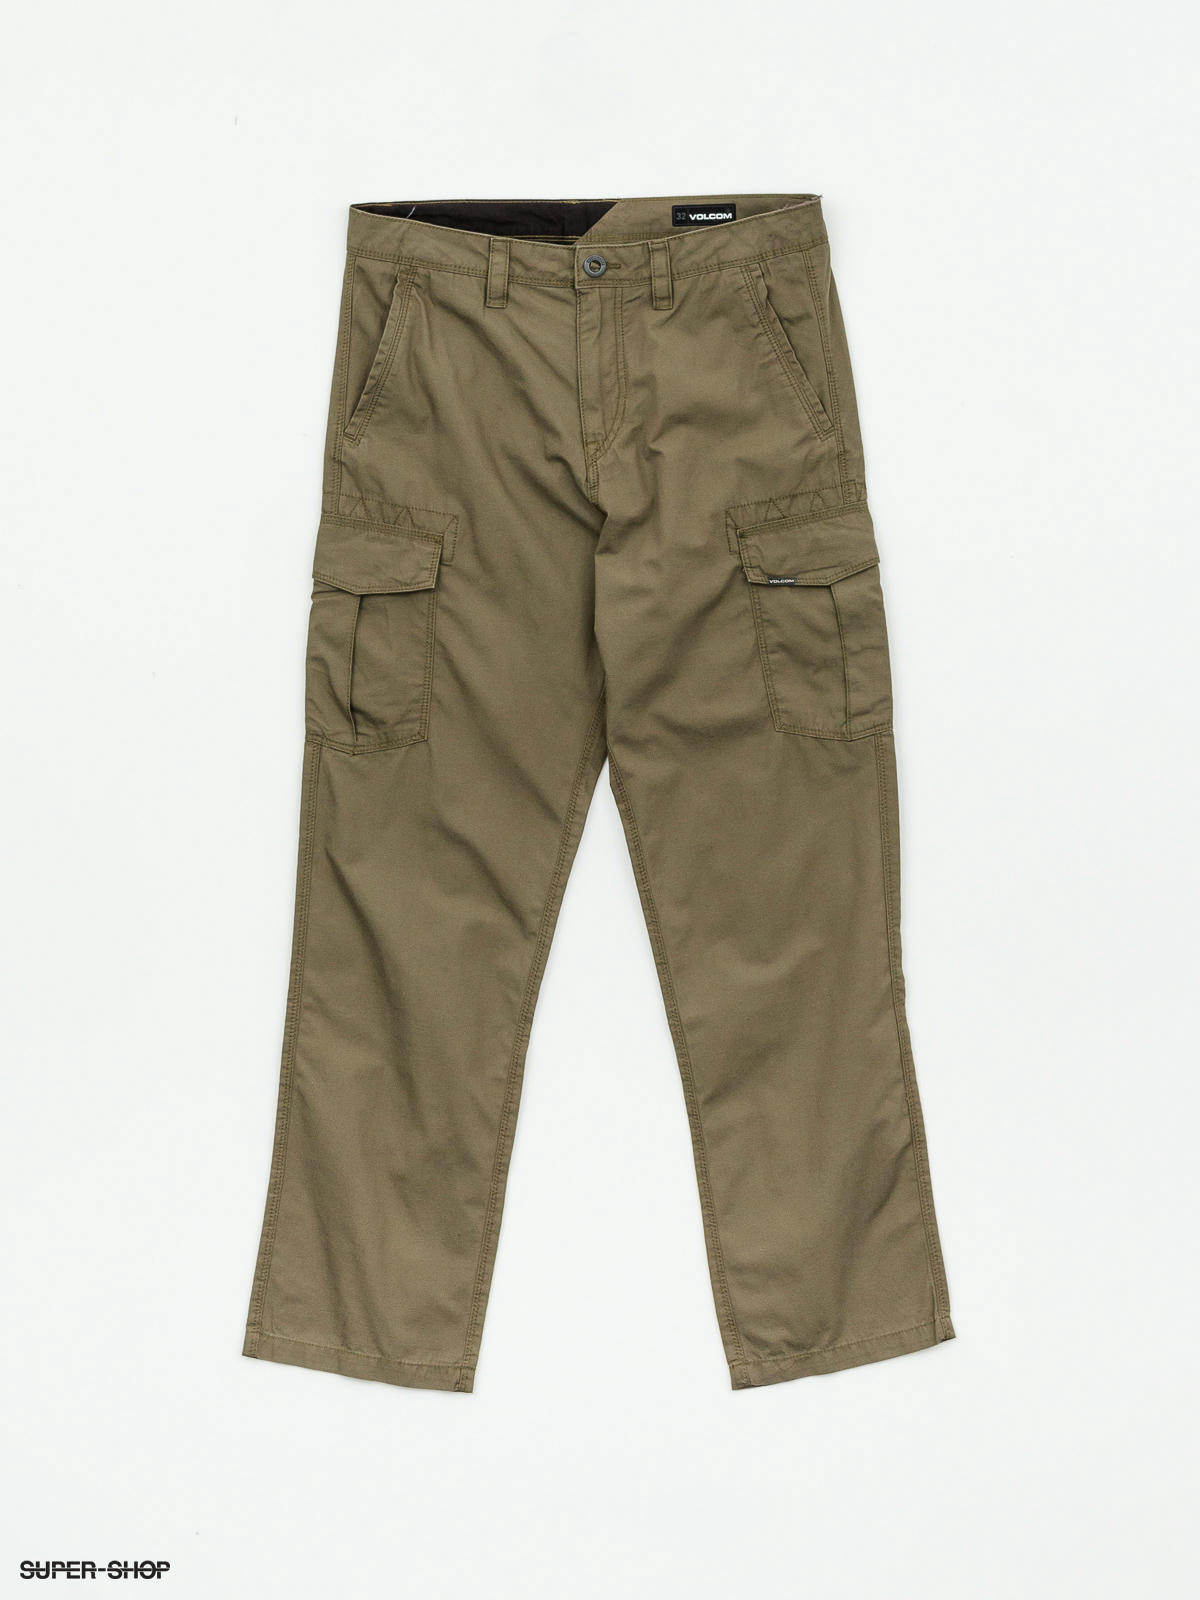 Cargo Pants Combo Offer Deals - tundraecology.hi.is 1694336705